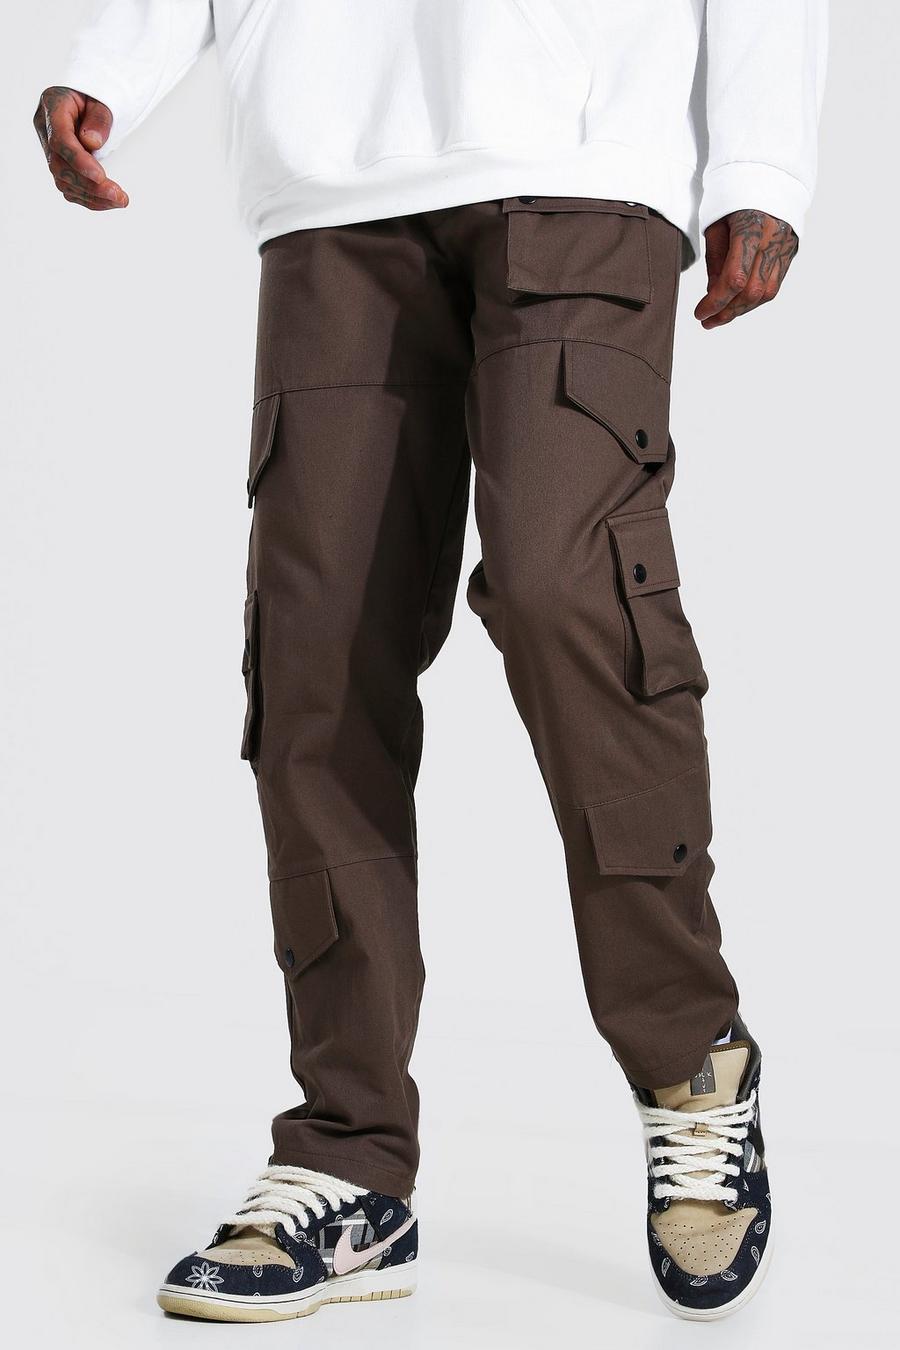 https://media.boohoo.com/i/boohoo/bmm05883_chocolate_xl/male-chocolate-fixed-waistband-relaxed-fit-cargo-trousers/?w=900&qlt=default&fmt.jp2.qlt=70&fmt=auto&sm=fit